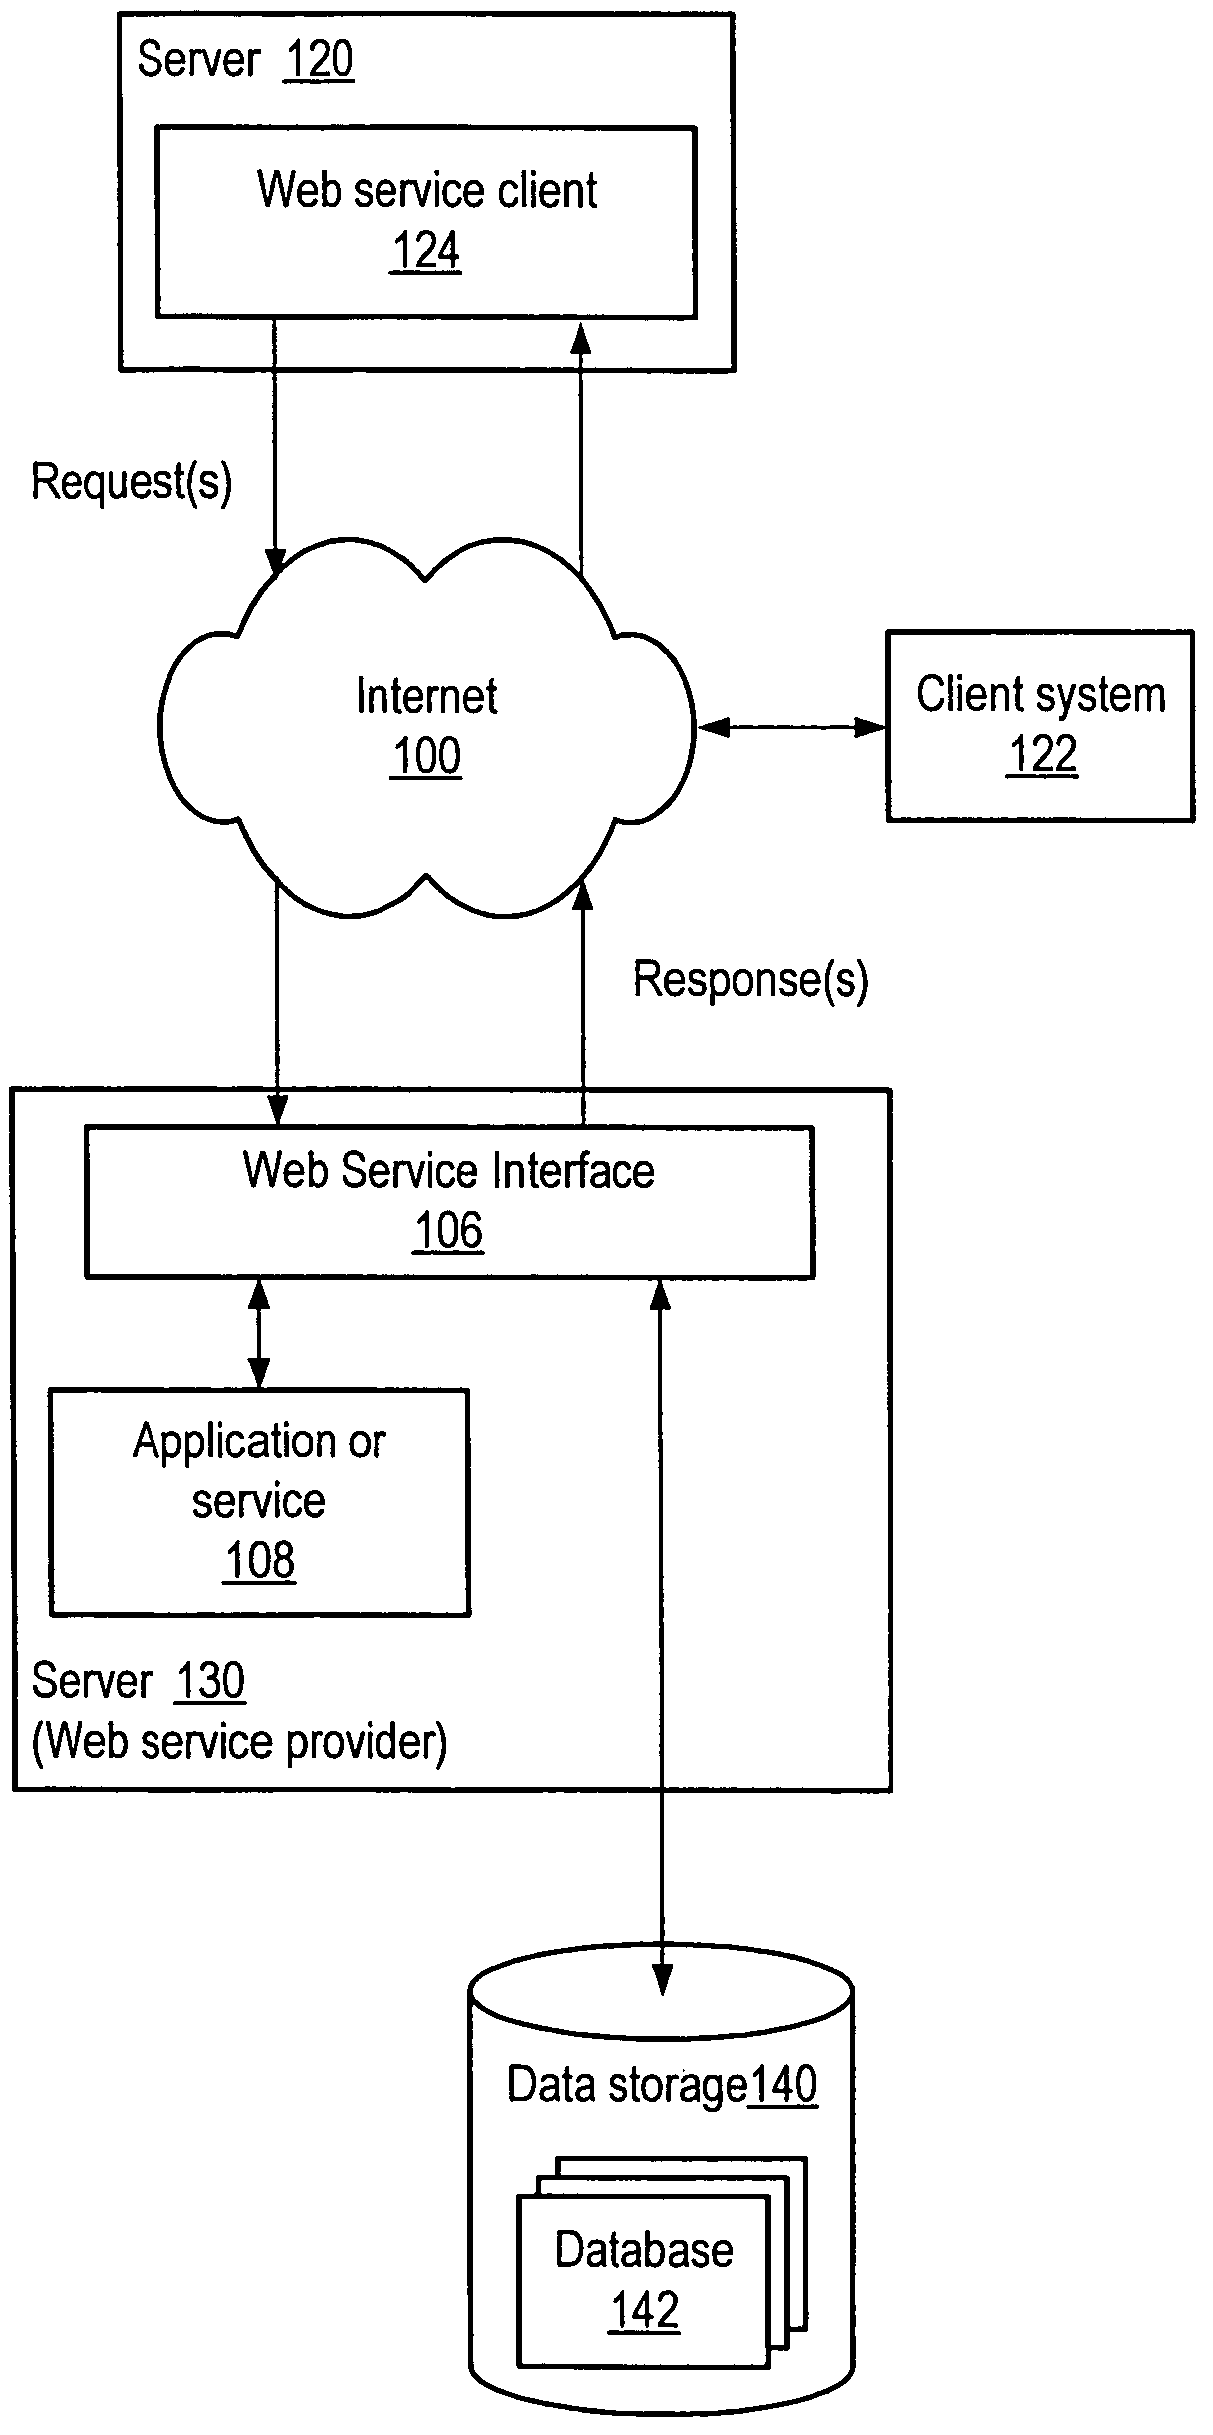 Method and apparatus for a searchable data service